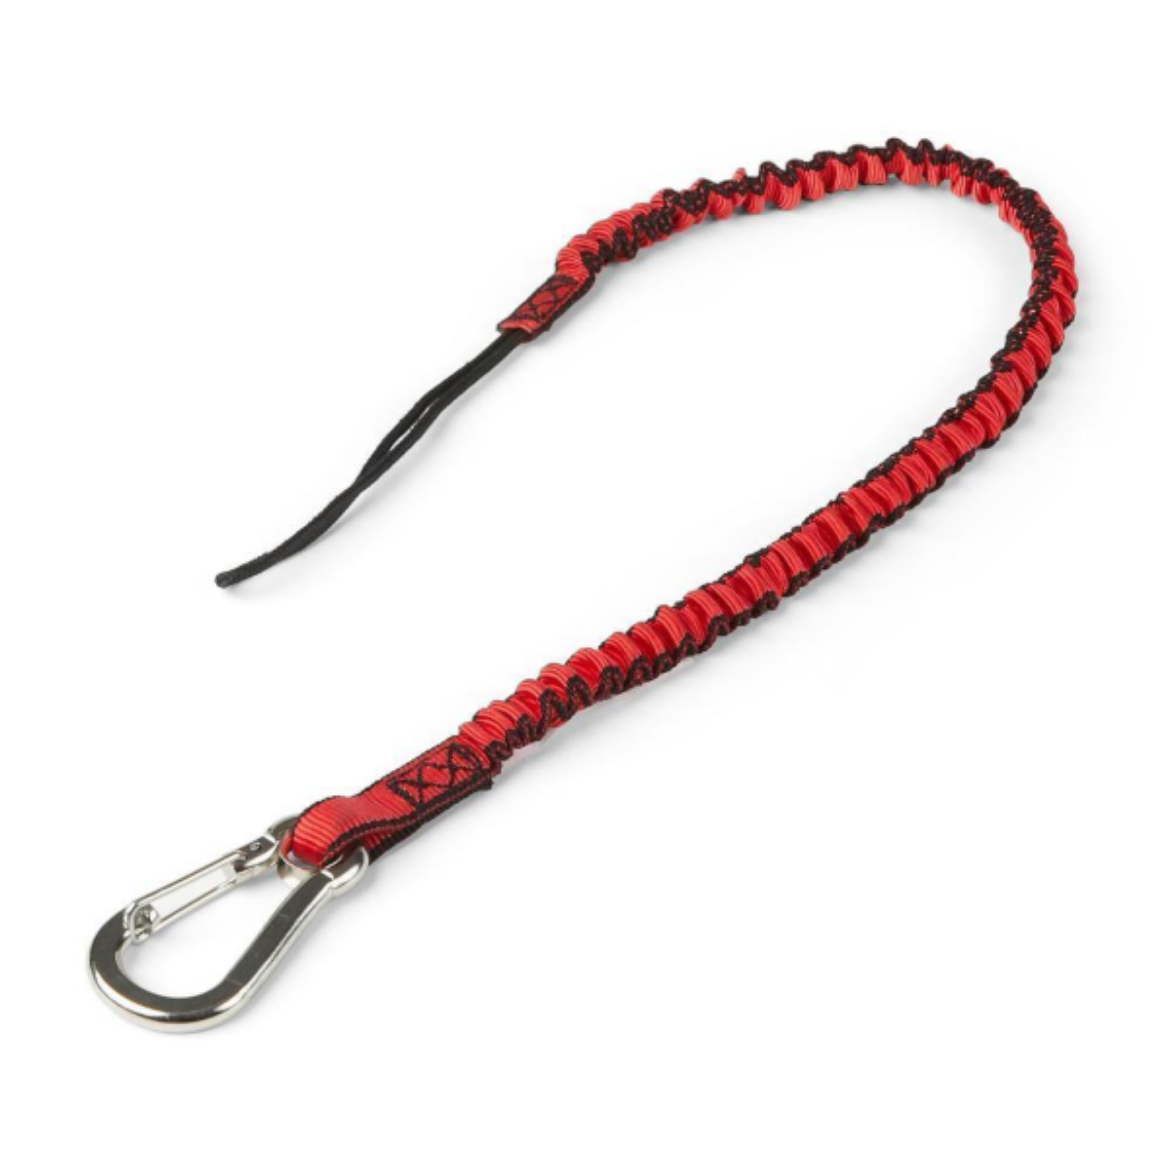 Picture of BUNGEE TETHER SINGLE-ACTION - 2.5KG